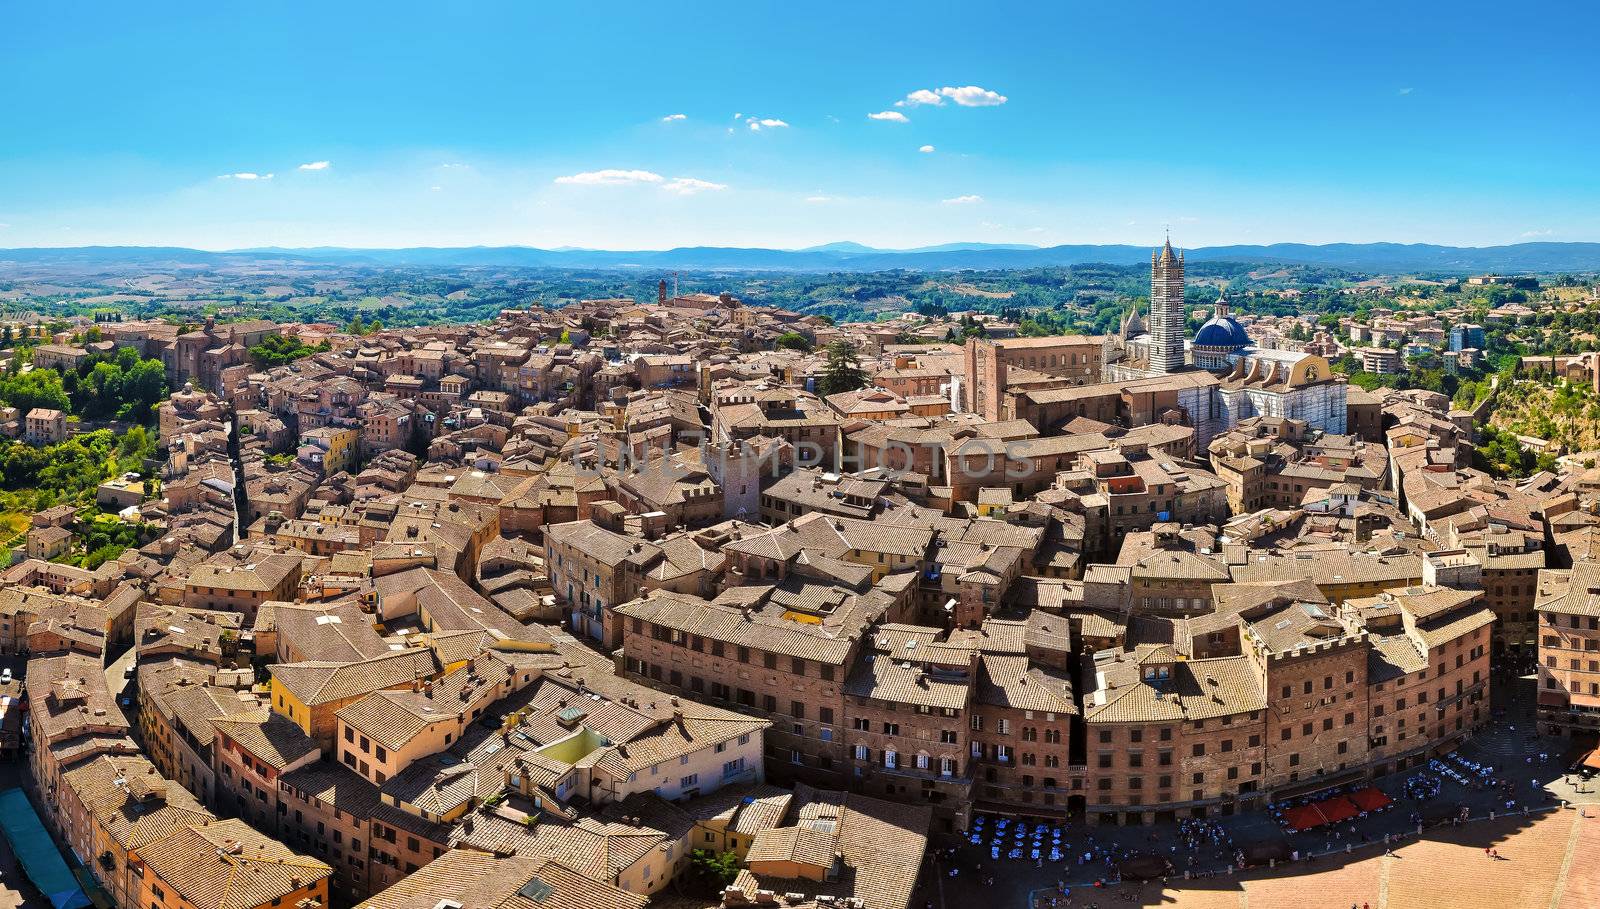 Sienna birds eye panorama view from Torra Mangia by martinm303